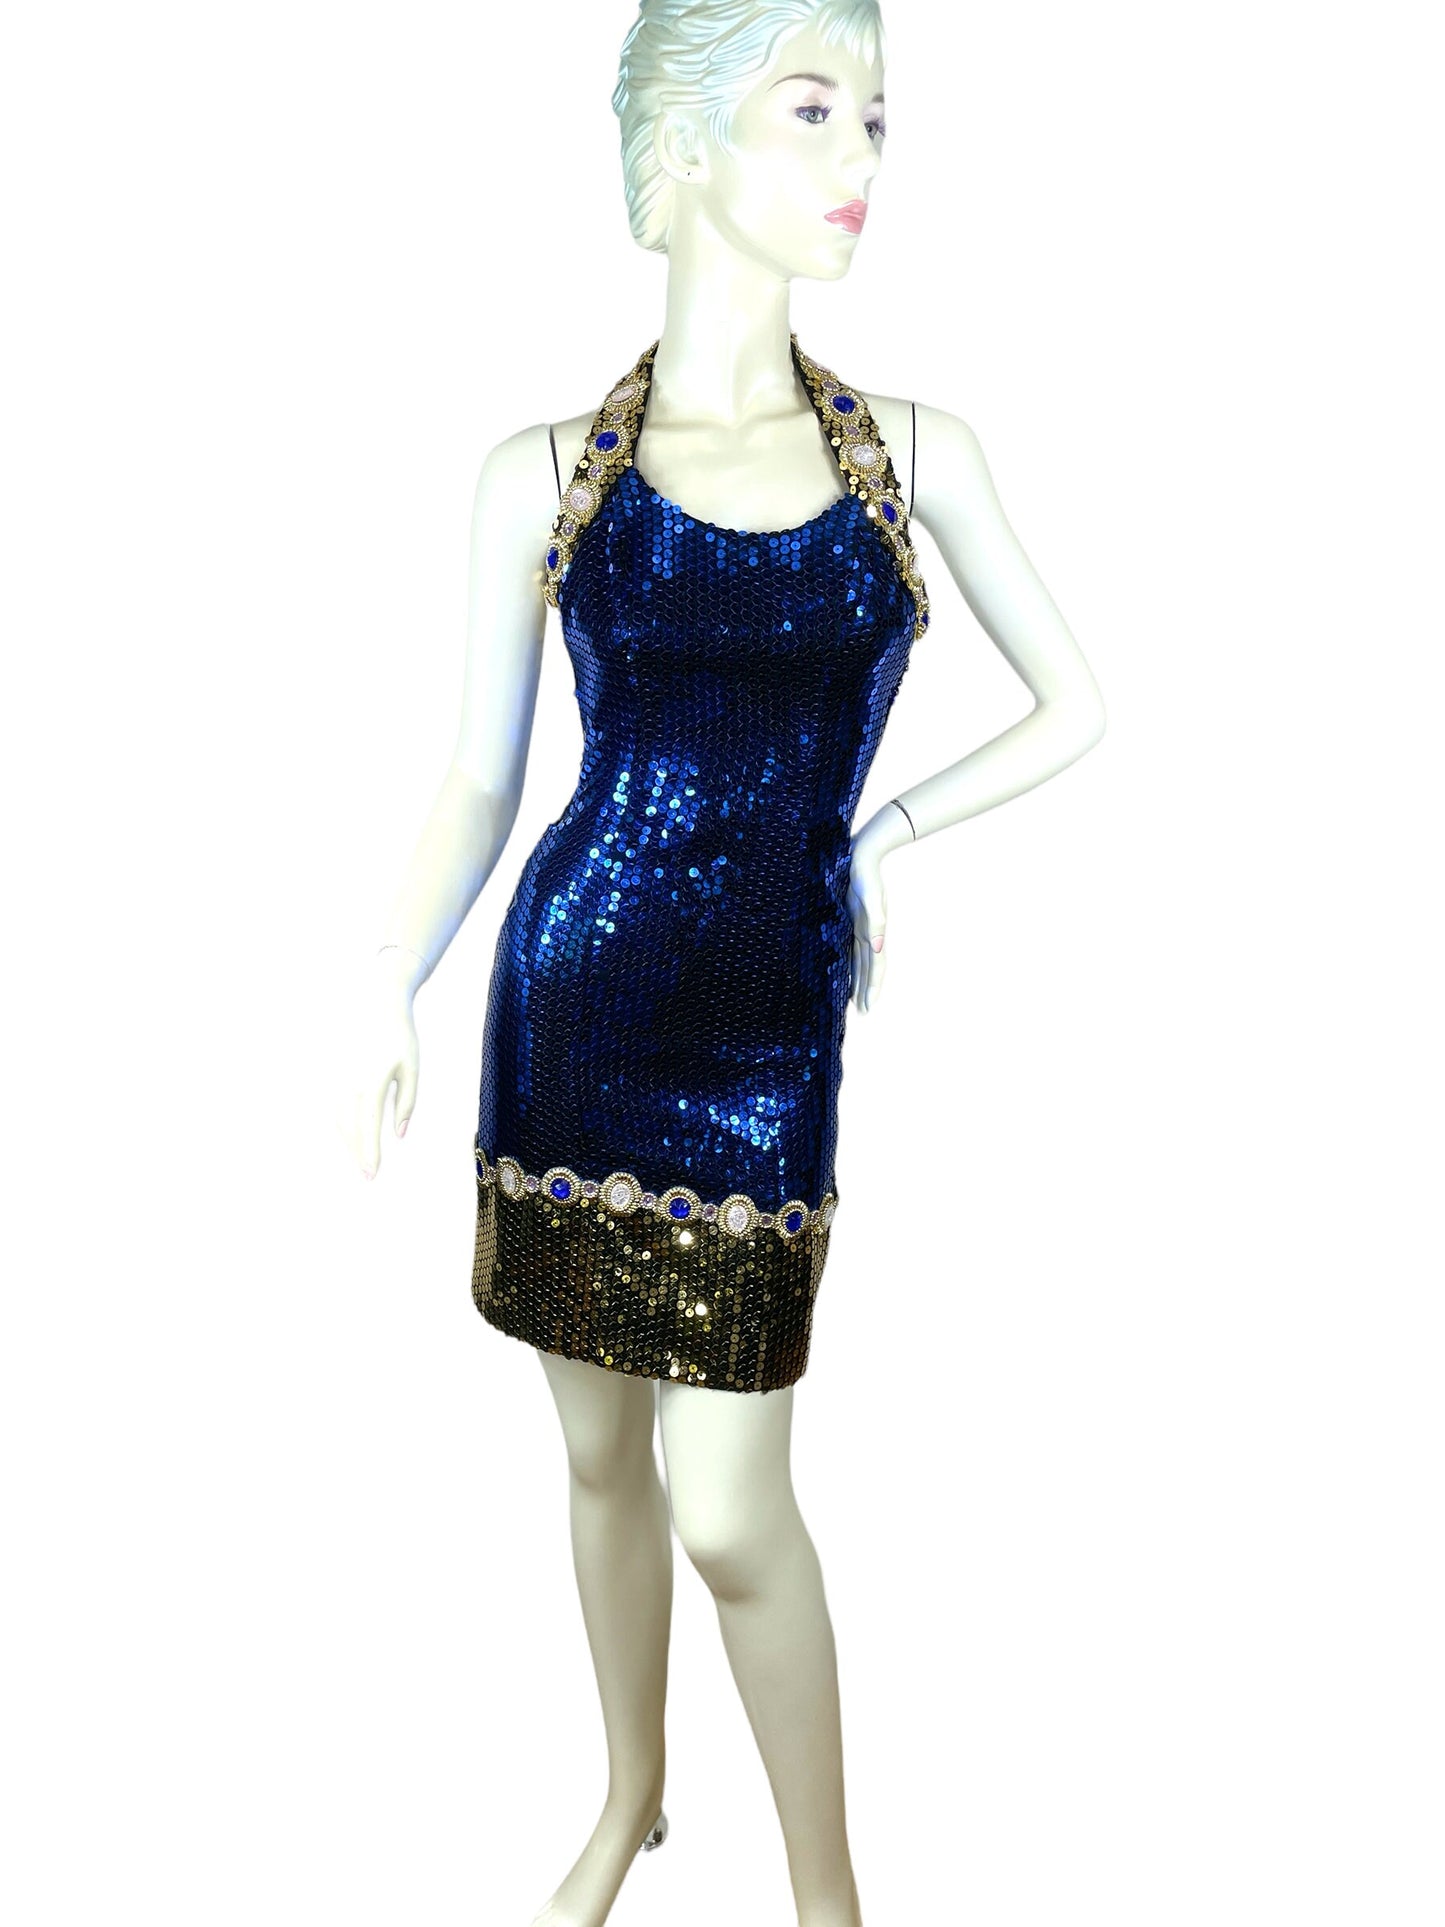 Sequin mini halter dress with jewels blue and gold by Alyce Designs Size XS/S